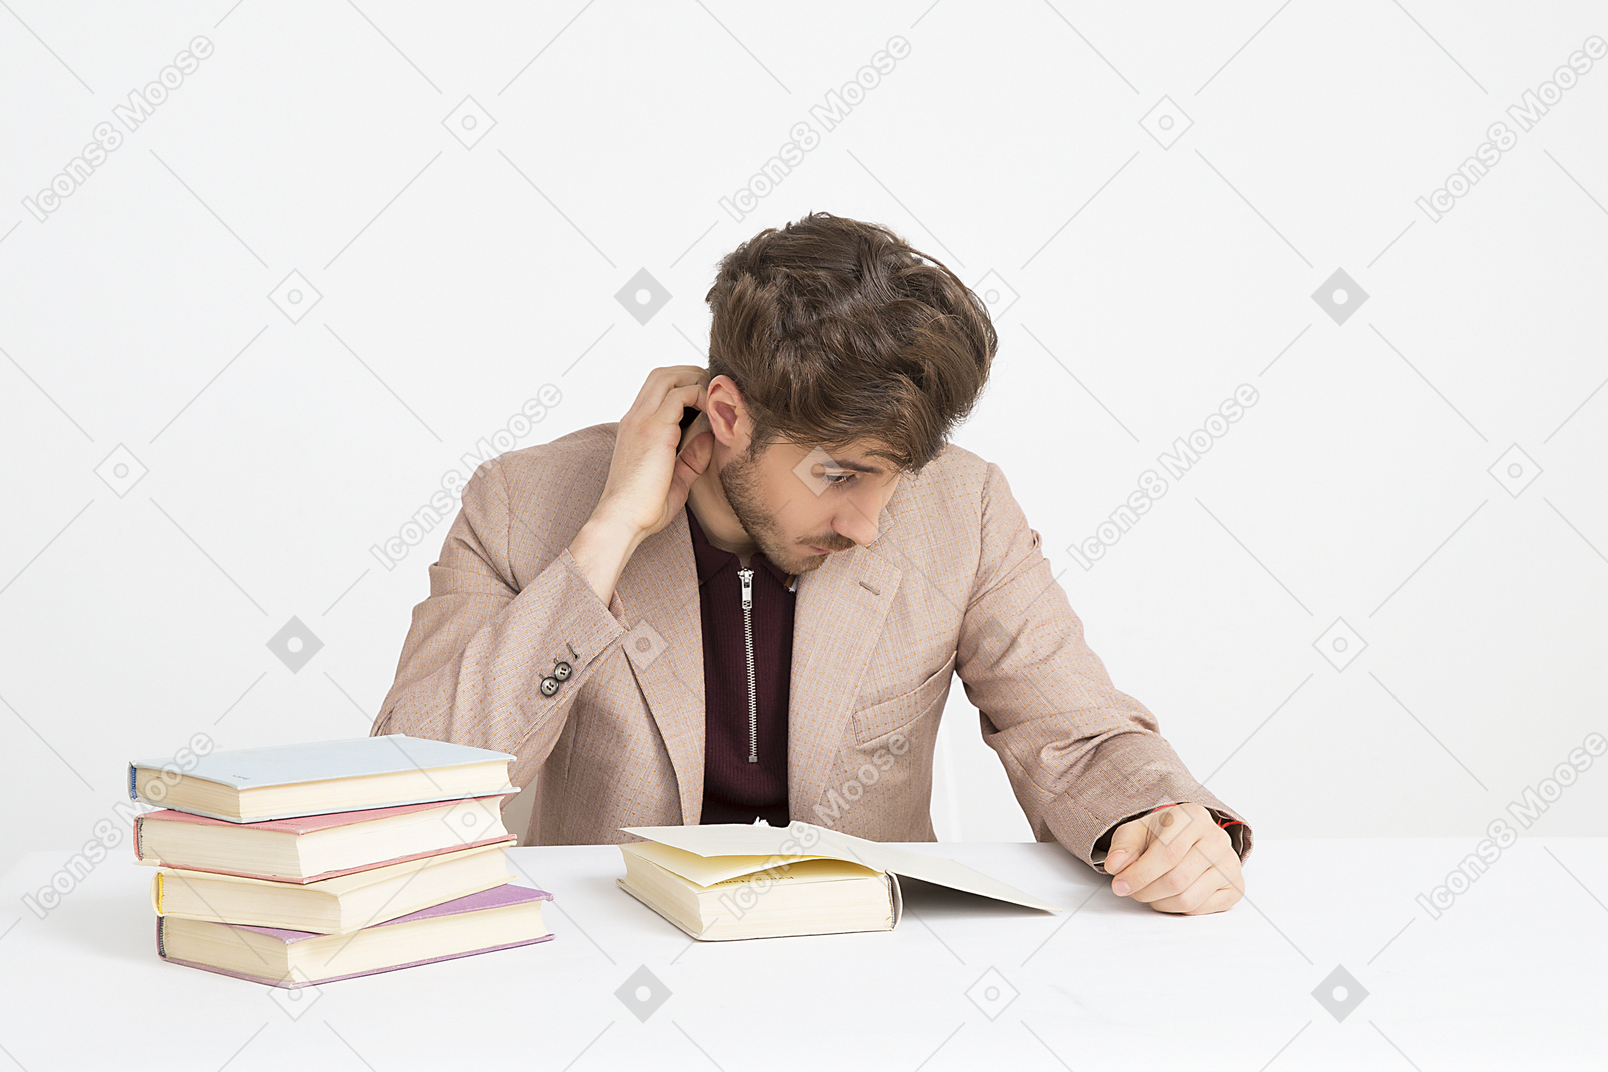 Handsome young man reading books